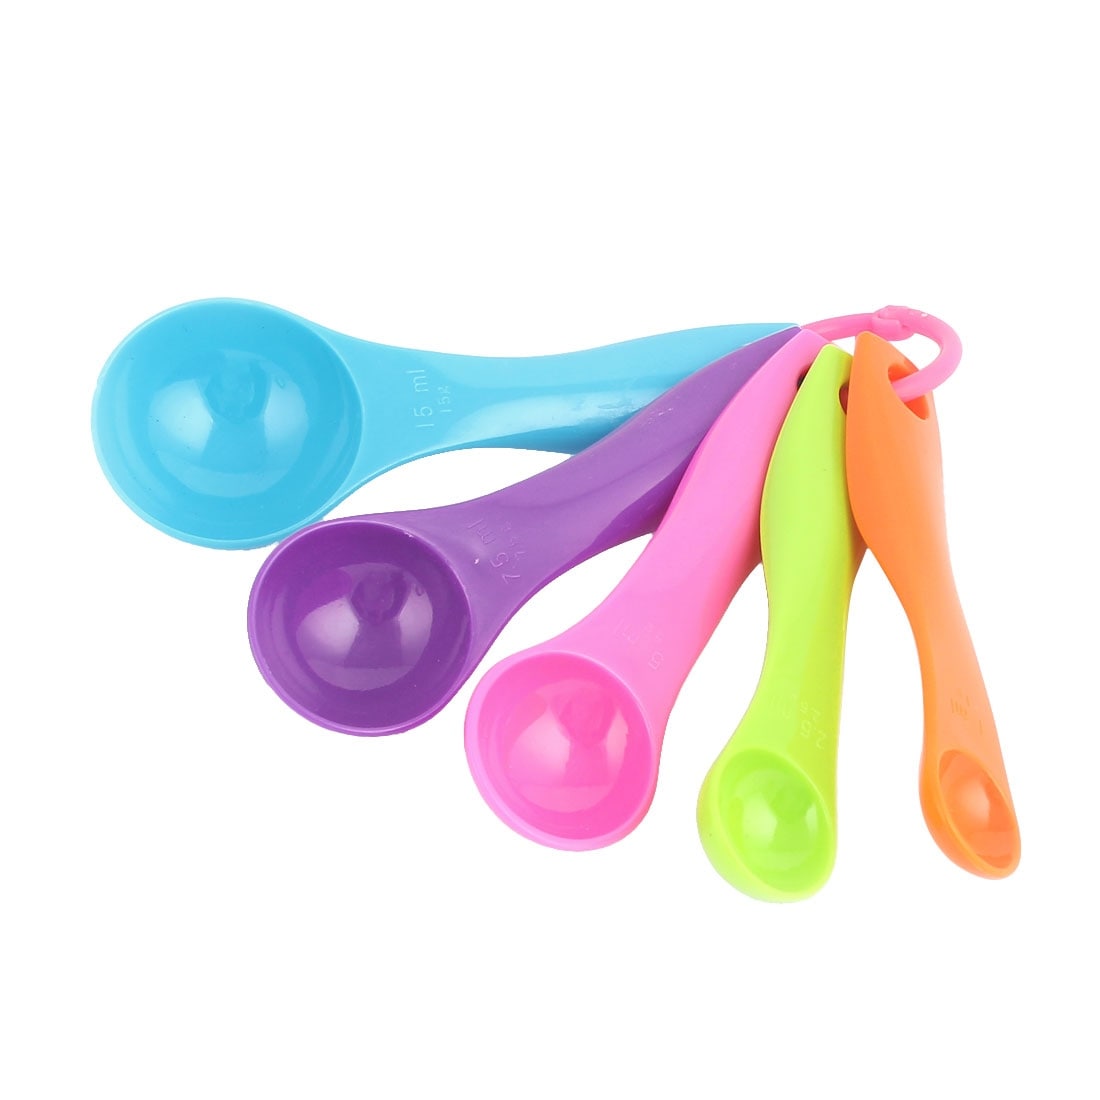 https://ak1.ostkcdn.com/images/products/is/images/direct/a23c7b83d59a991ebc0467d3ea257d0c546b8c42/Plastic-Round-Shape-Measure-Spoons-1ml-15ml-Capacity-5-Pcs-Multicolor.jpg